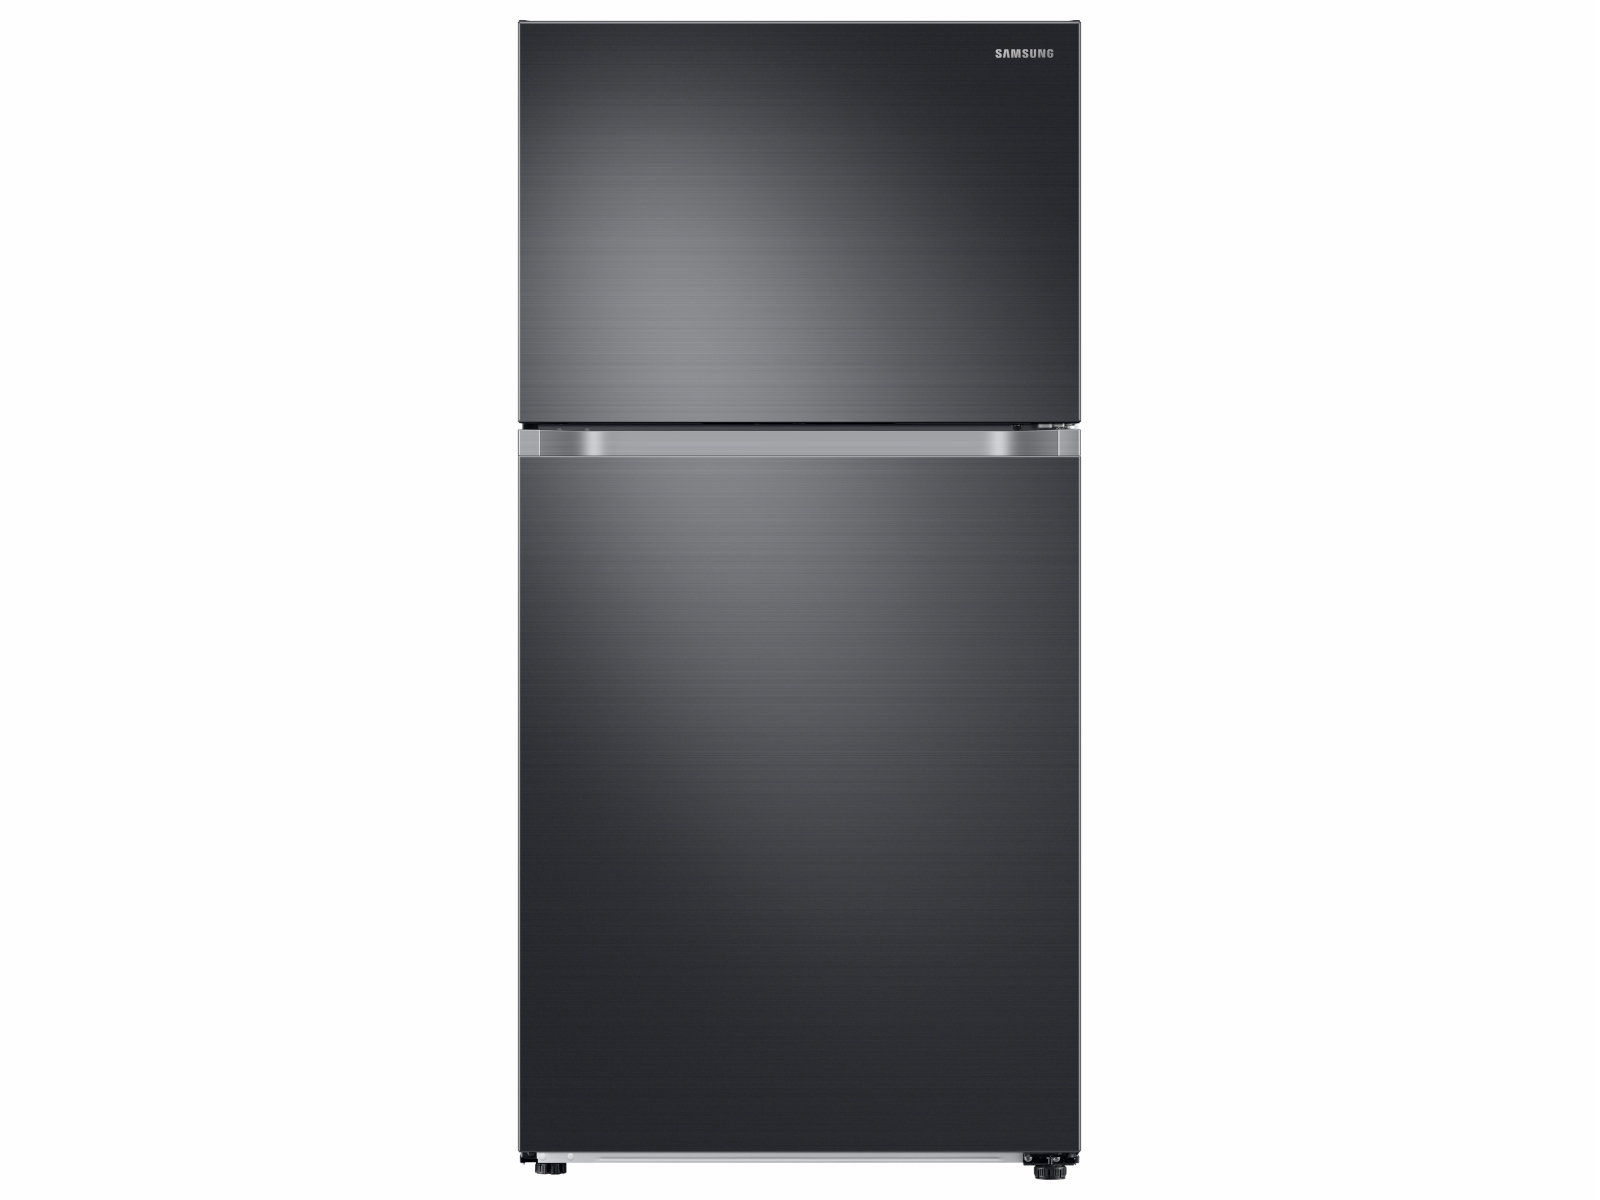 Samsung 21 cu. ft. Top Freezer Refrigerator with FlexZone™ and Ice Maker in Black Stainless Steel(RT21M6215SG/AA)